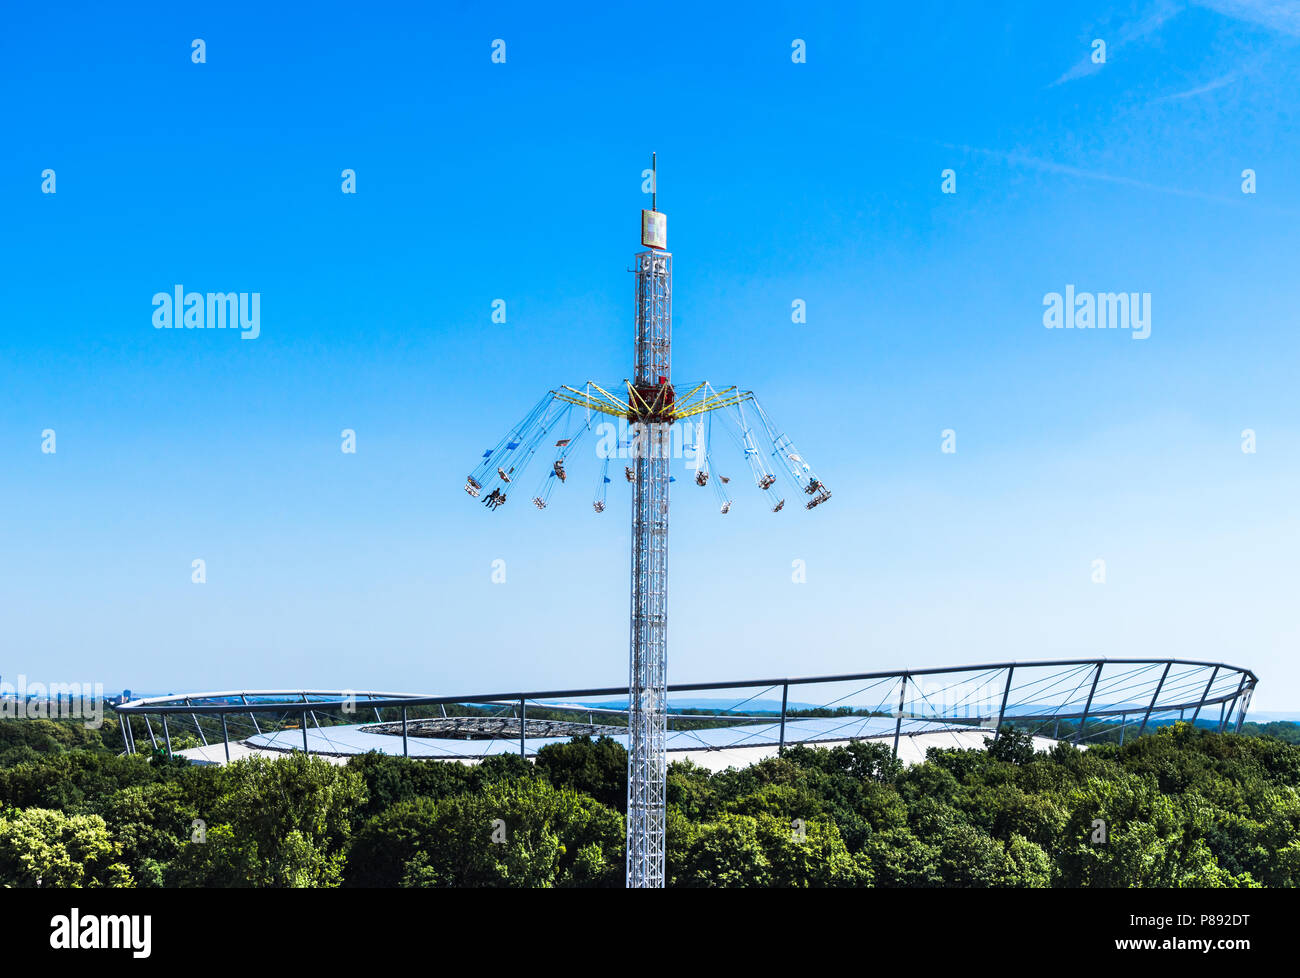 Hannover, Germany, July 7., 2018: Giant chain carousel with a height of 60 meters in front of the stadium HDI-Arena, blue sky Stock Photo